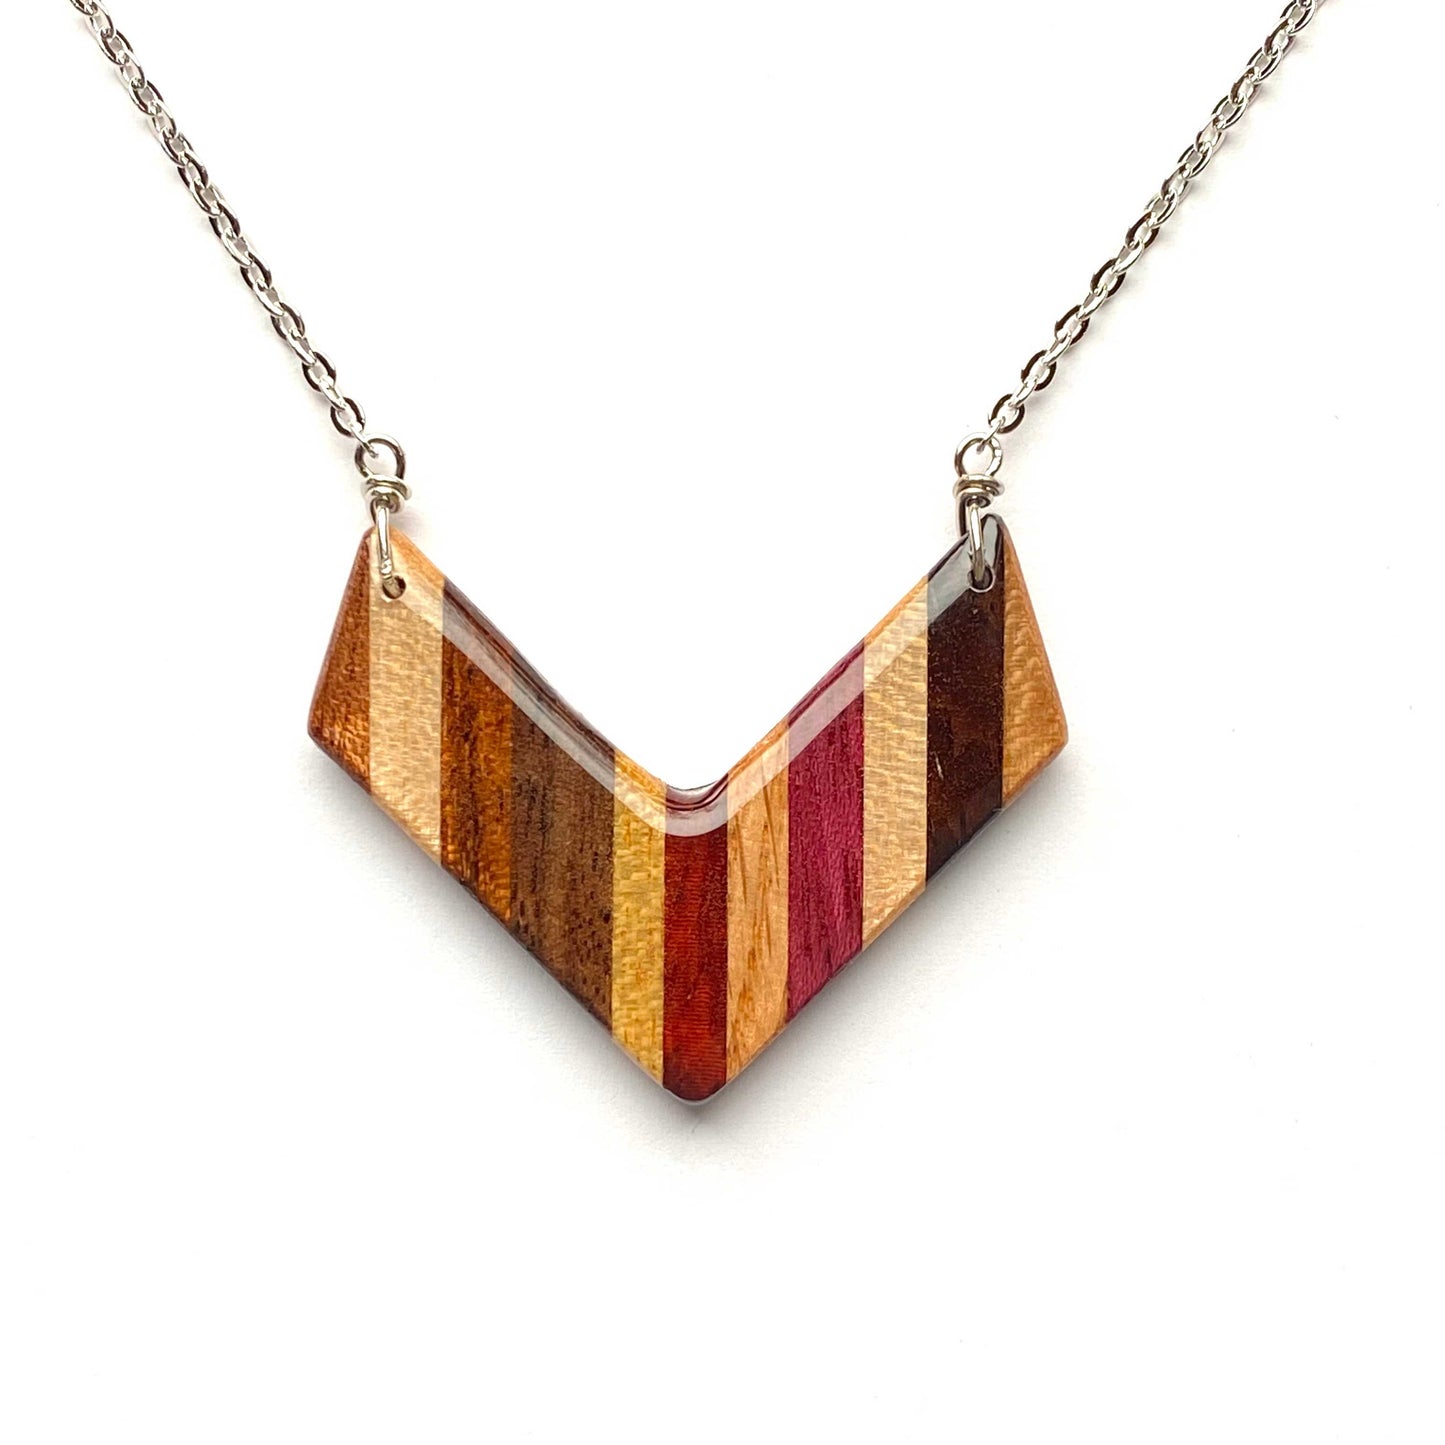 Large Chevron Reclaimed Wood Necklace